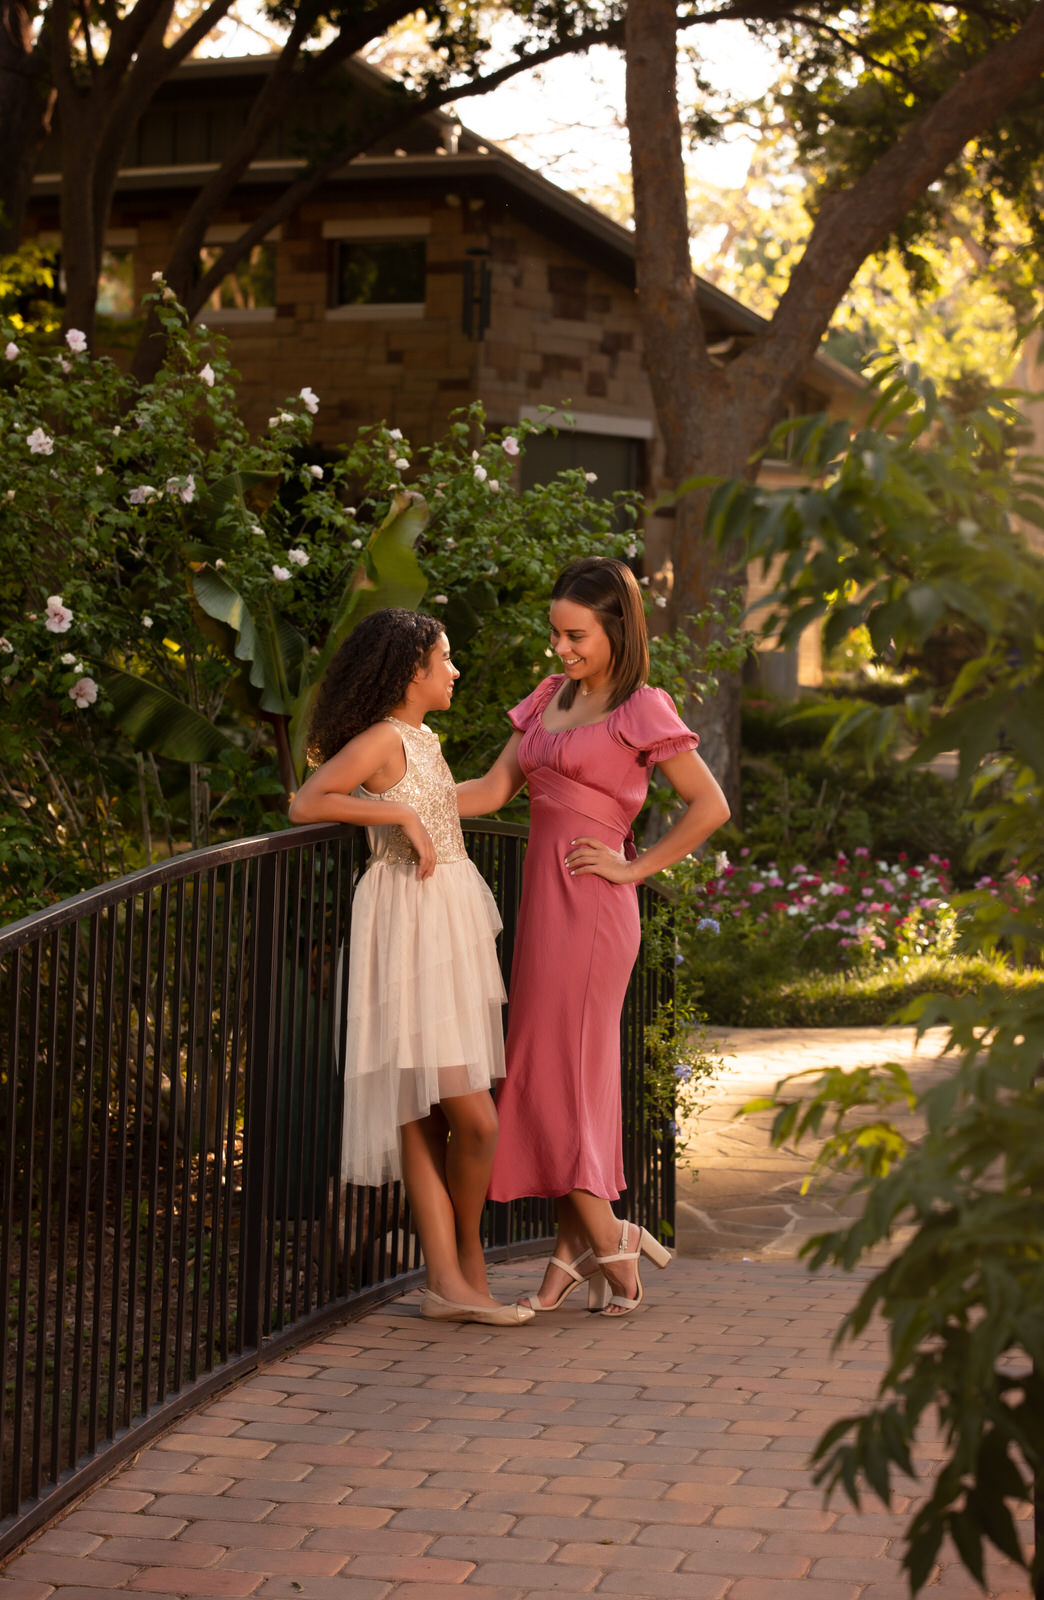 Two young women lean against a railing on a bridge, chatting in dresses things to do in mansfield tx